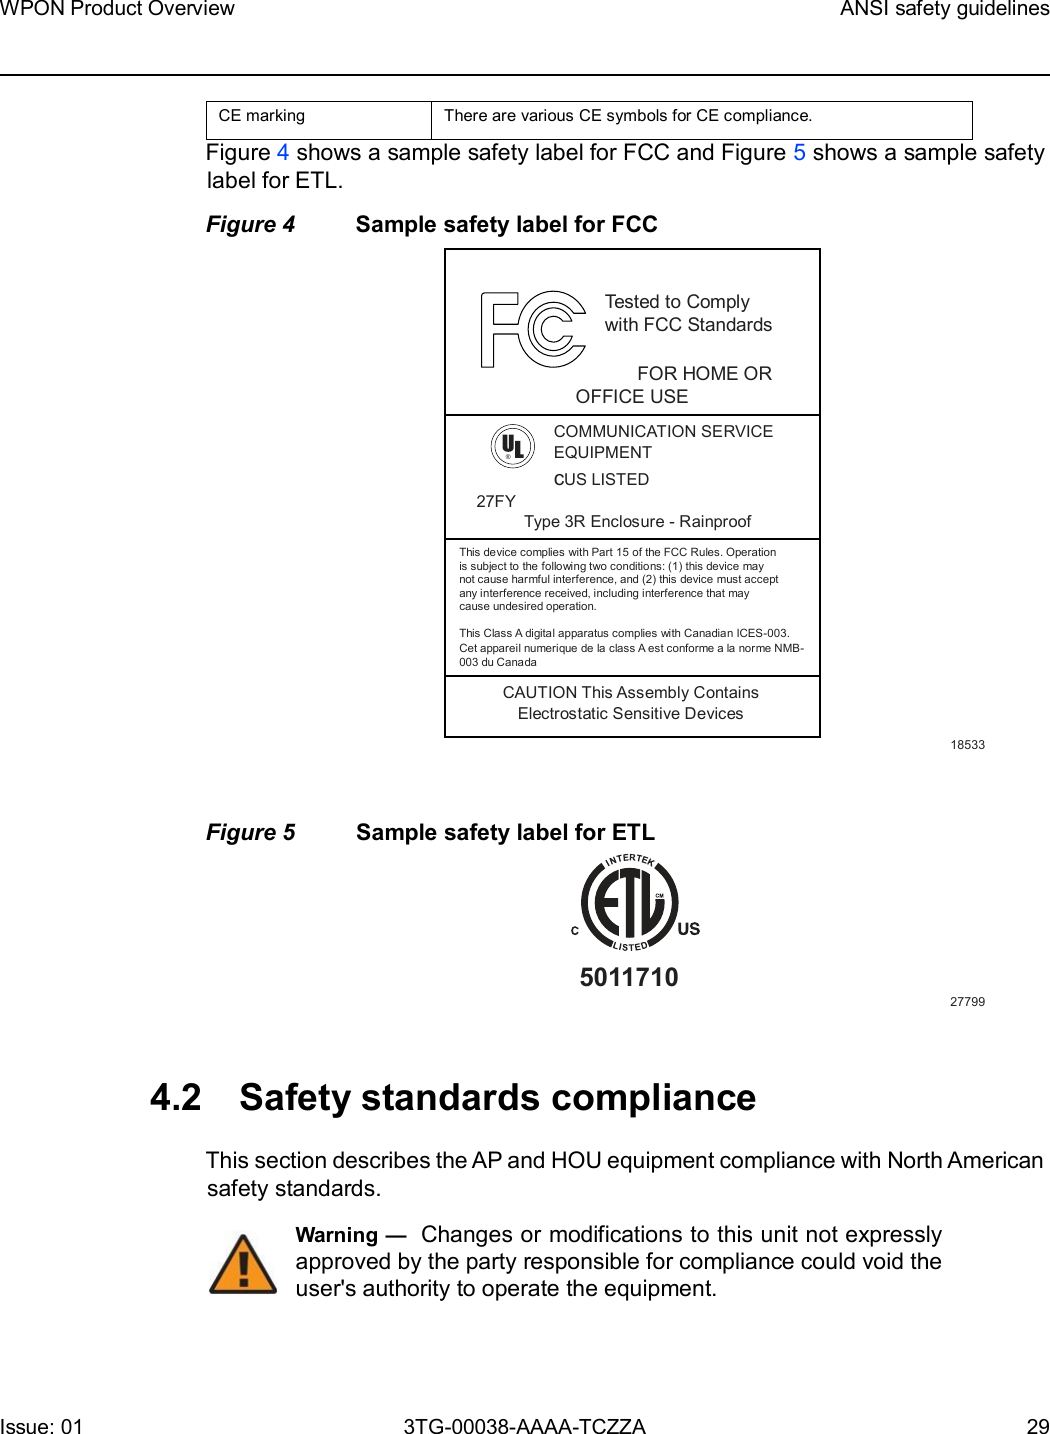 Page 29 of Nokia Bell 7577WPONAPAC WPON User Manual WPON Product Overview